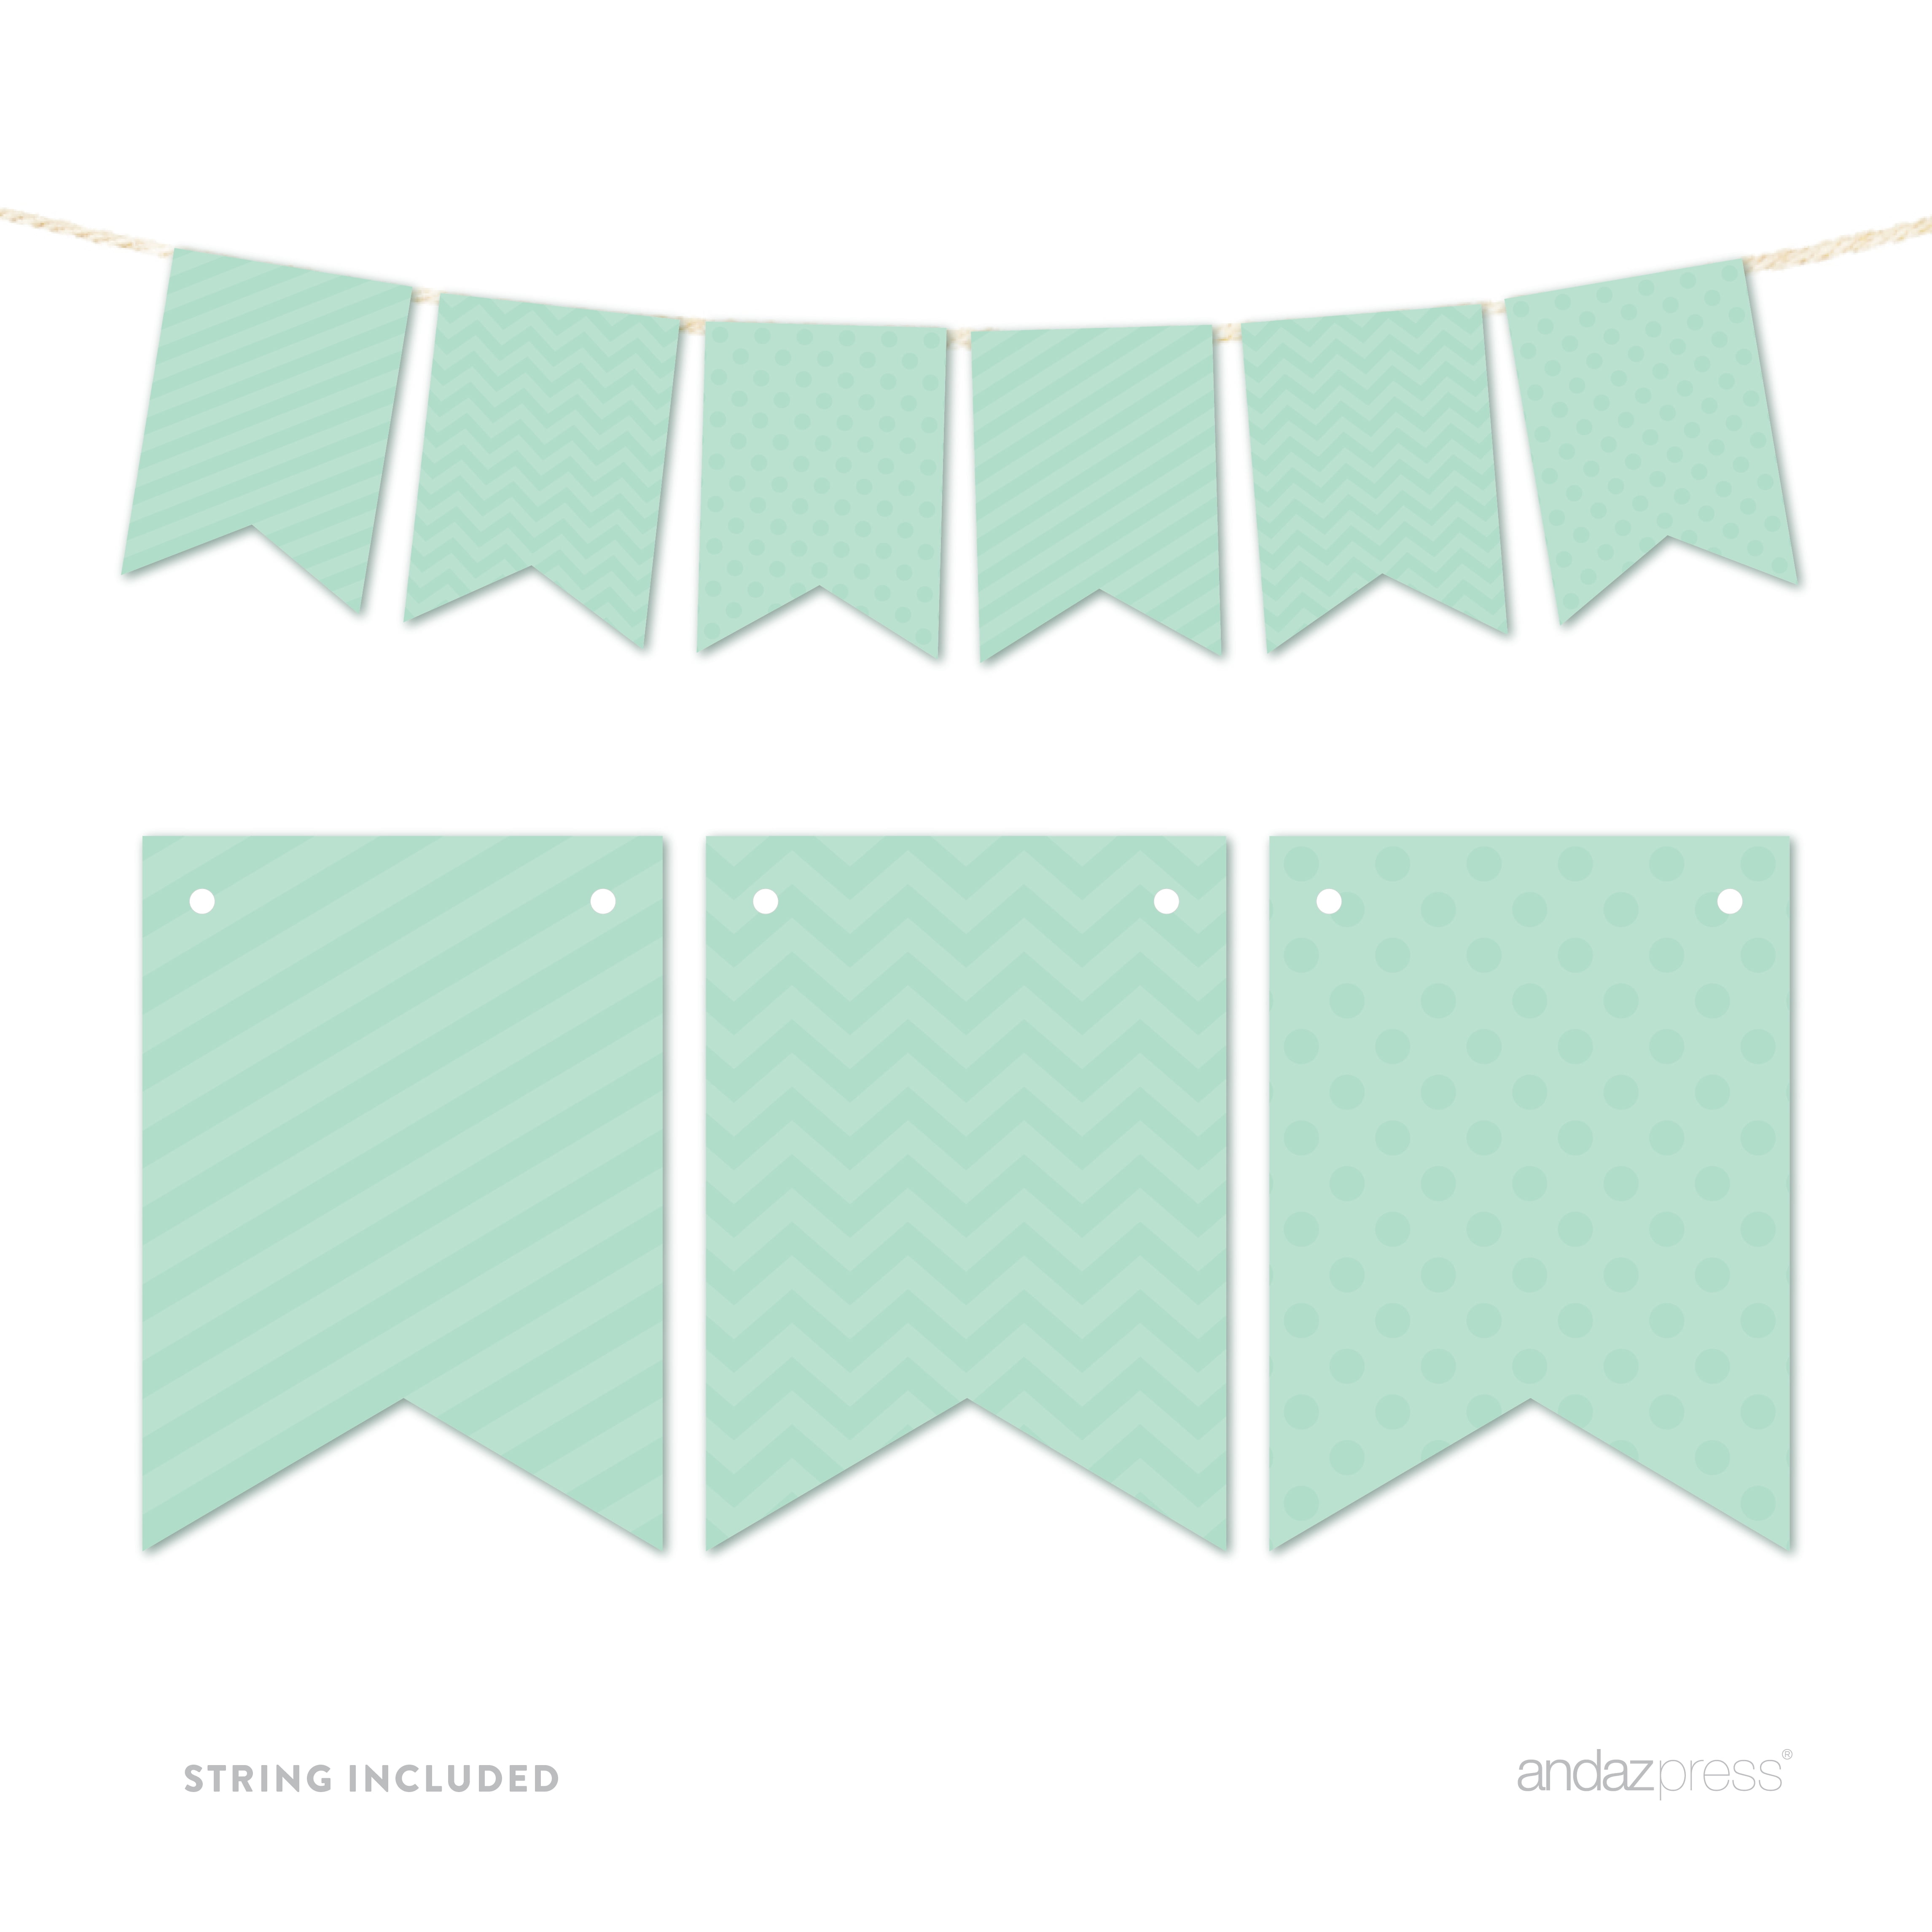 baby shower decoration girland for a nursery room or a party fabric bunting flag wall banner with chevron and mint colors